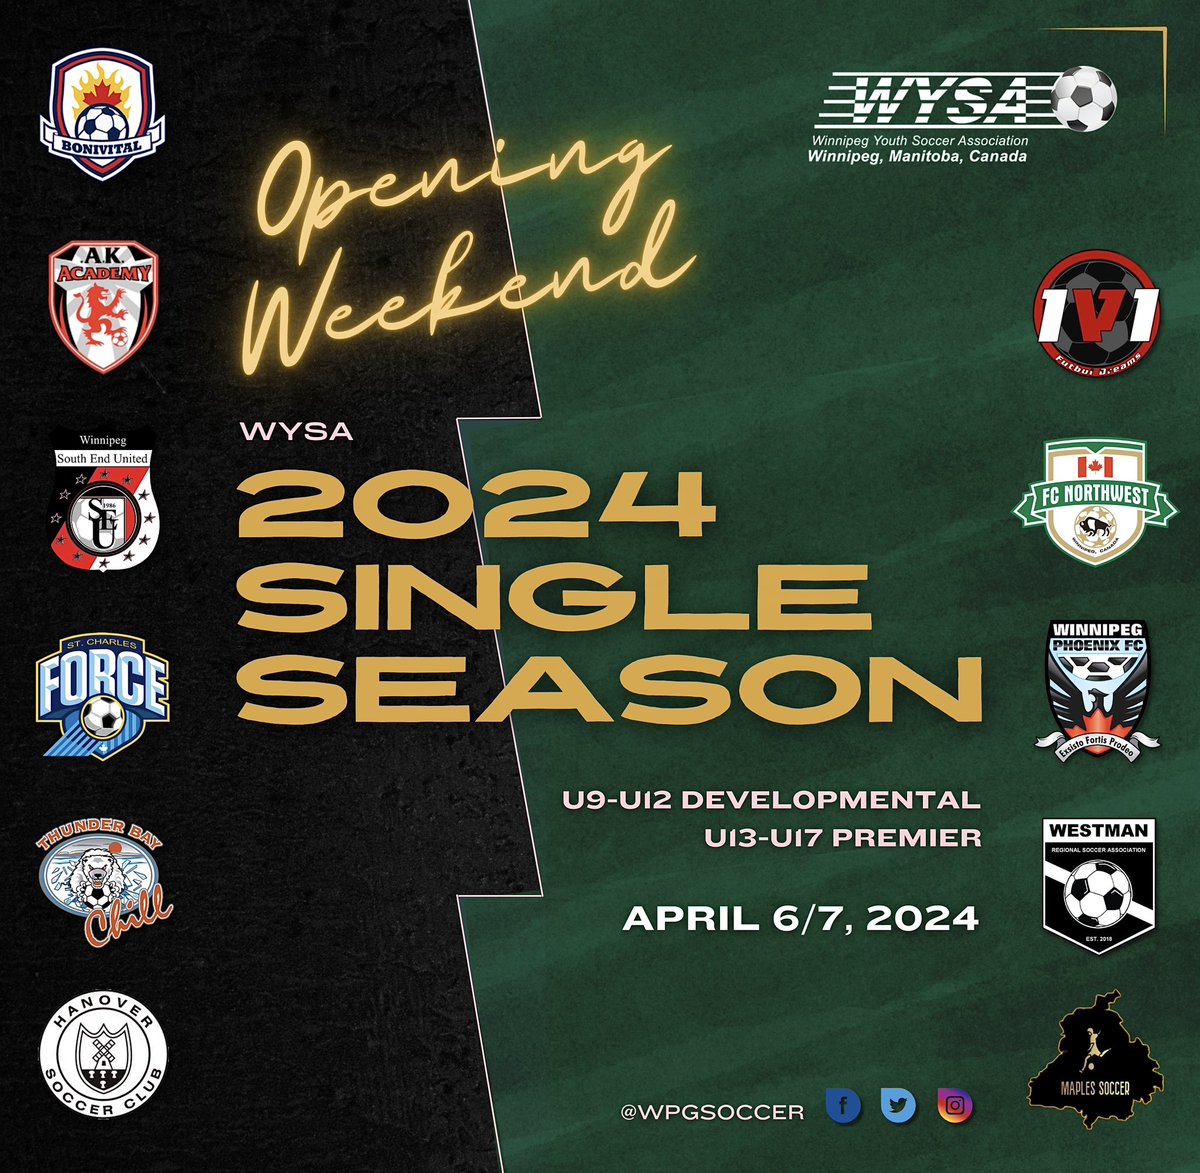 ‼️OPENING WEEKEND‼️

The WYSA Single Season is back with a full slate of matches this weekend! Check out our website to view your team’s fixtures, we look forward to a thrilling season full of action-packed matchups! ⚽️

#singleseason 
#openingweekend